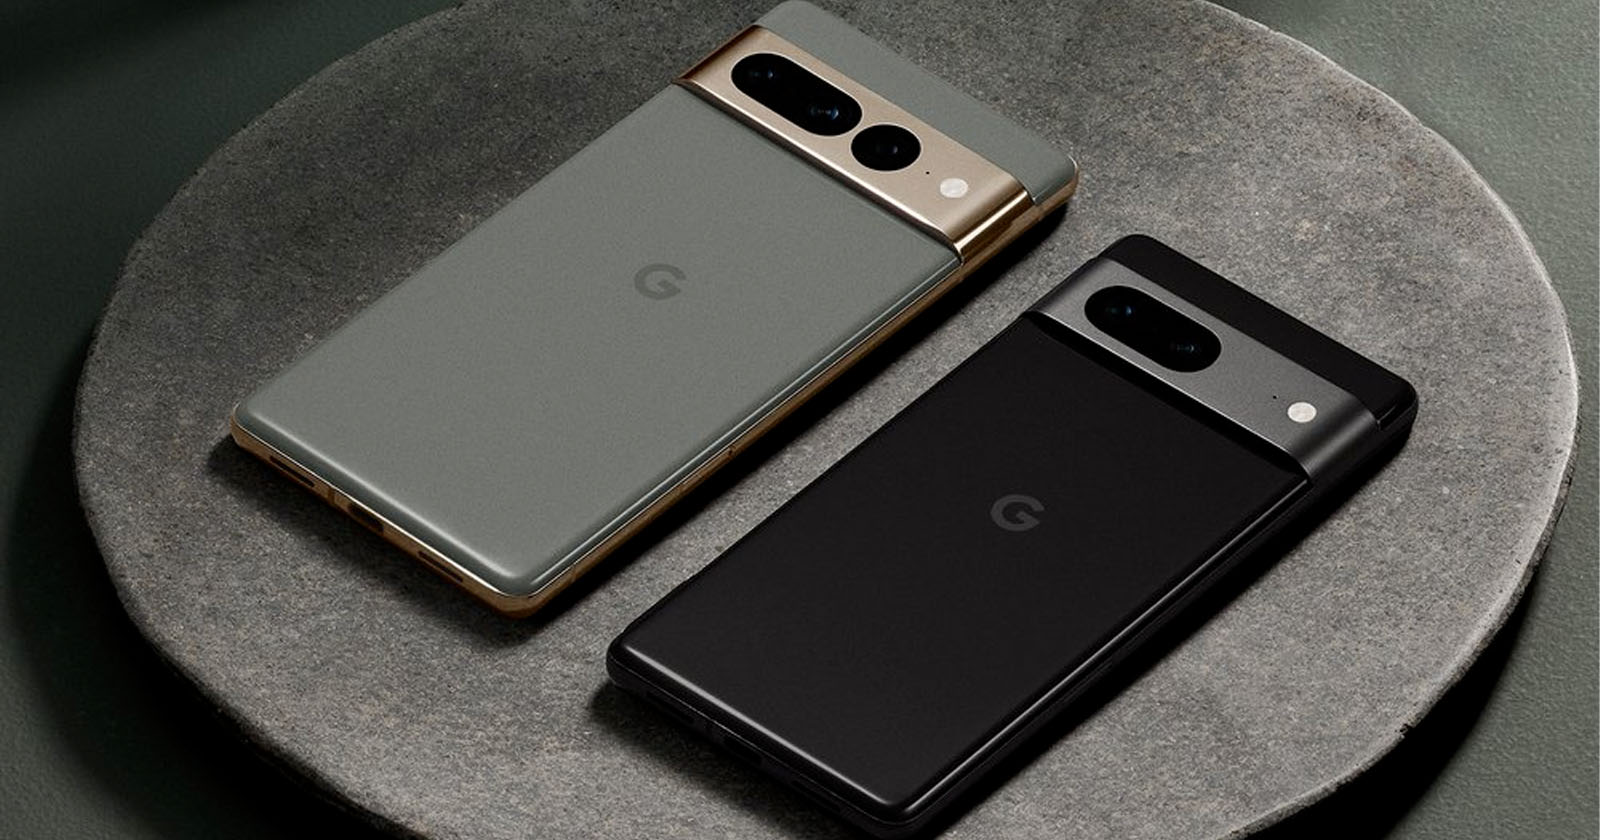 Google’s New Pixel 7 and Pixel 7 Pro Phones Feature Improved Cameras